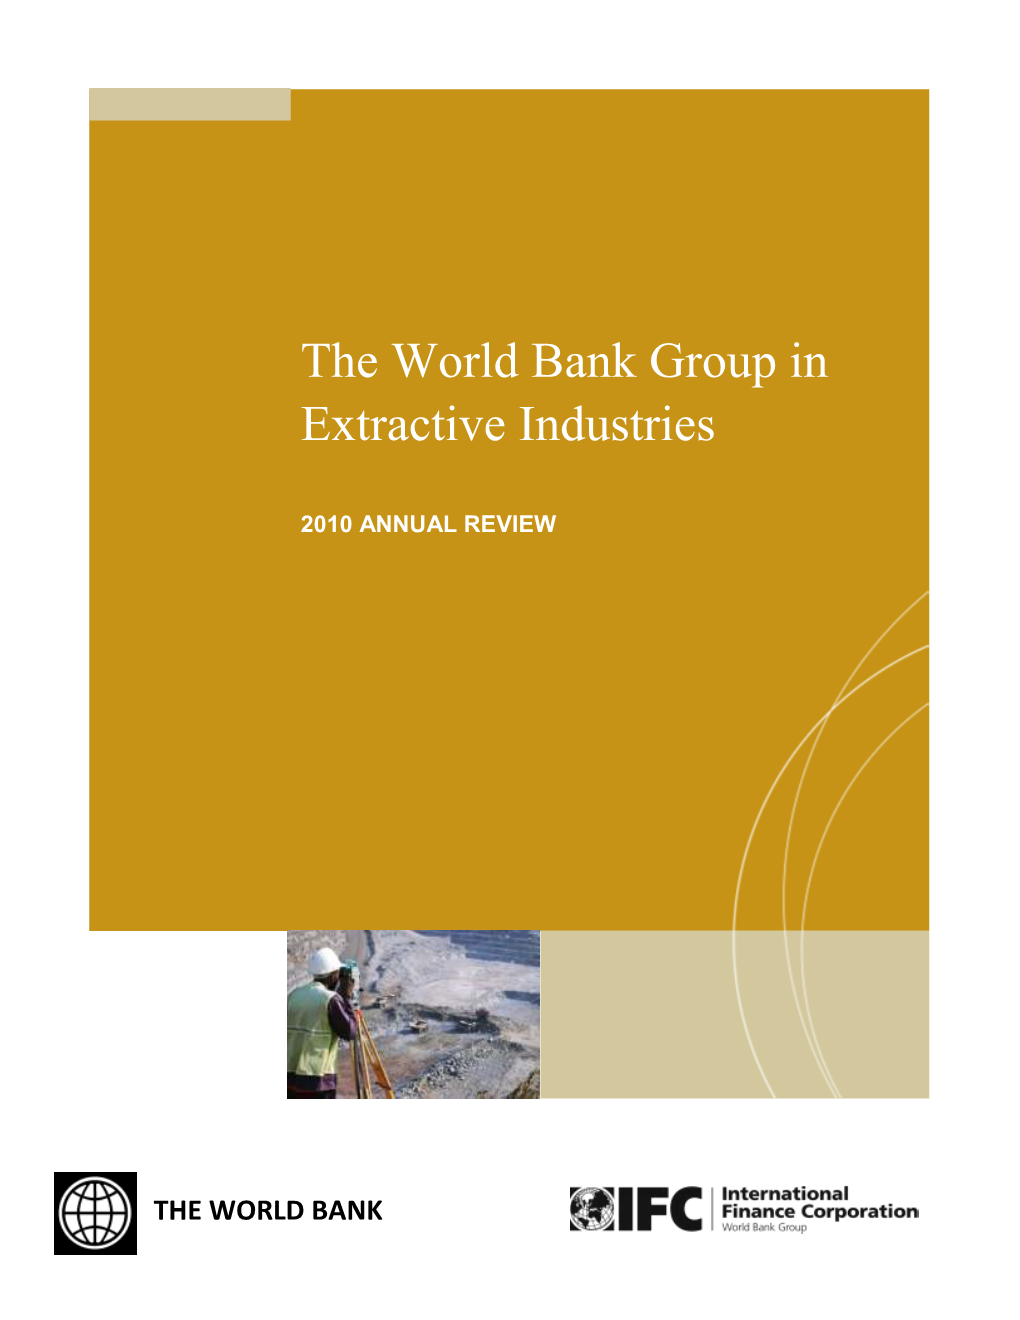 The World Bank Group in Extractive Industries